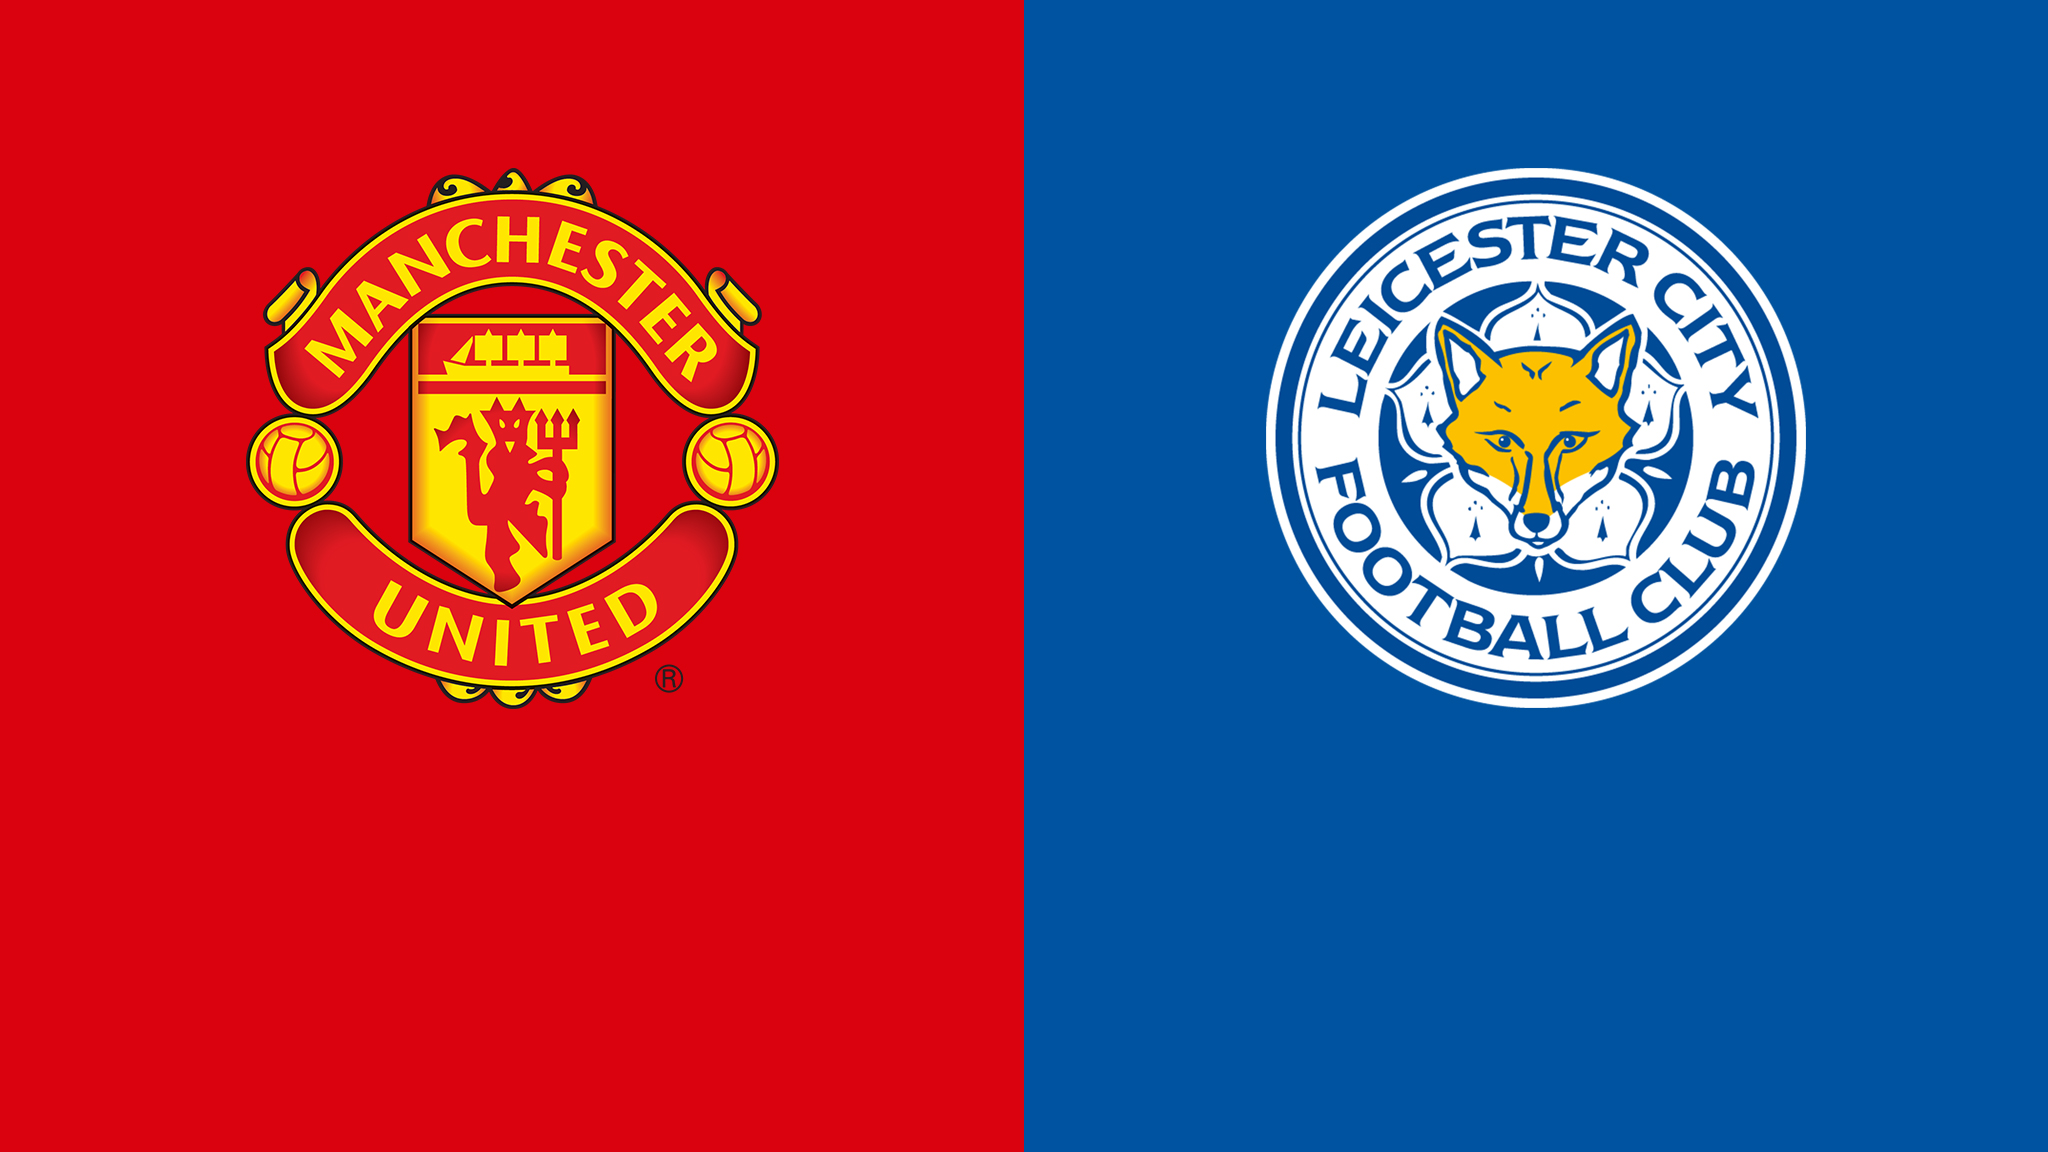 Man united vs leicester city